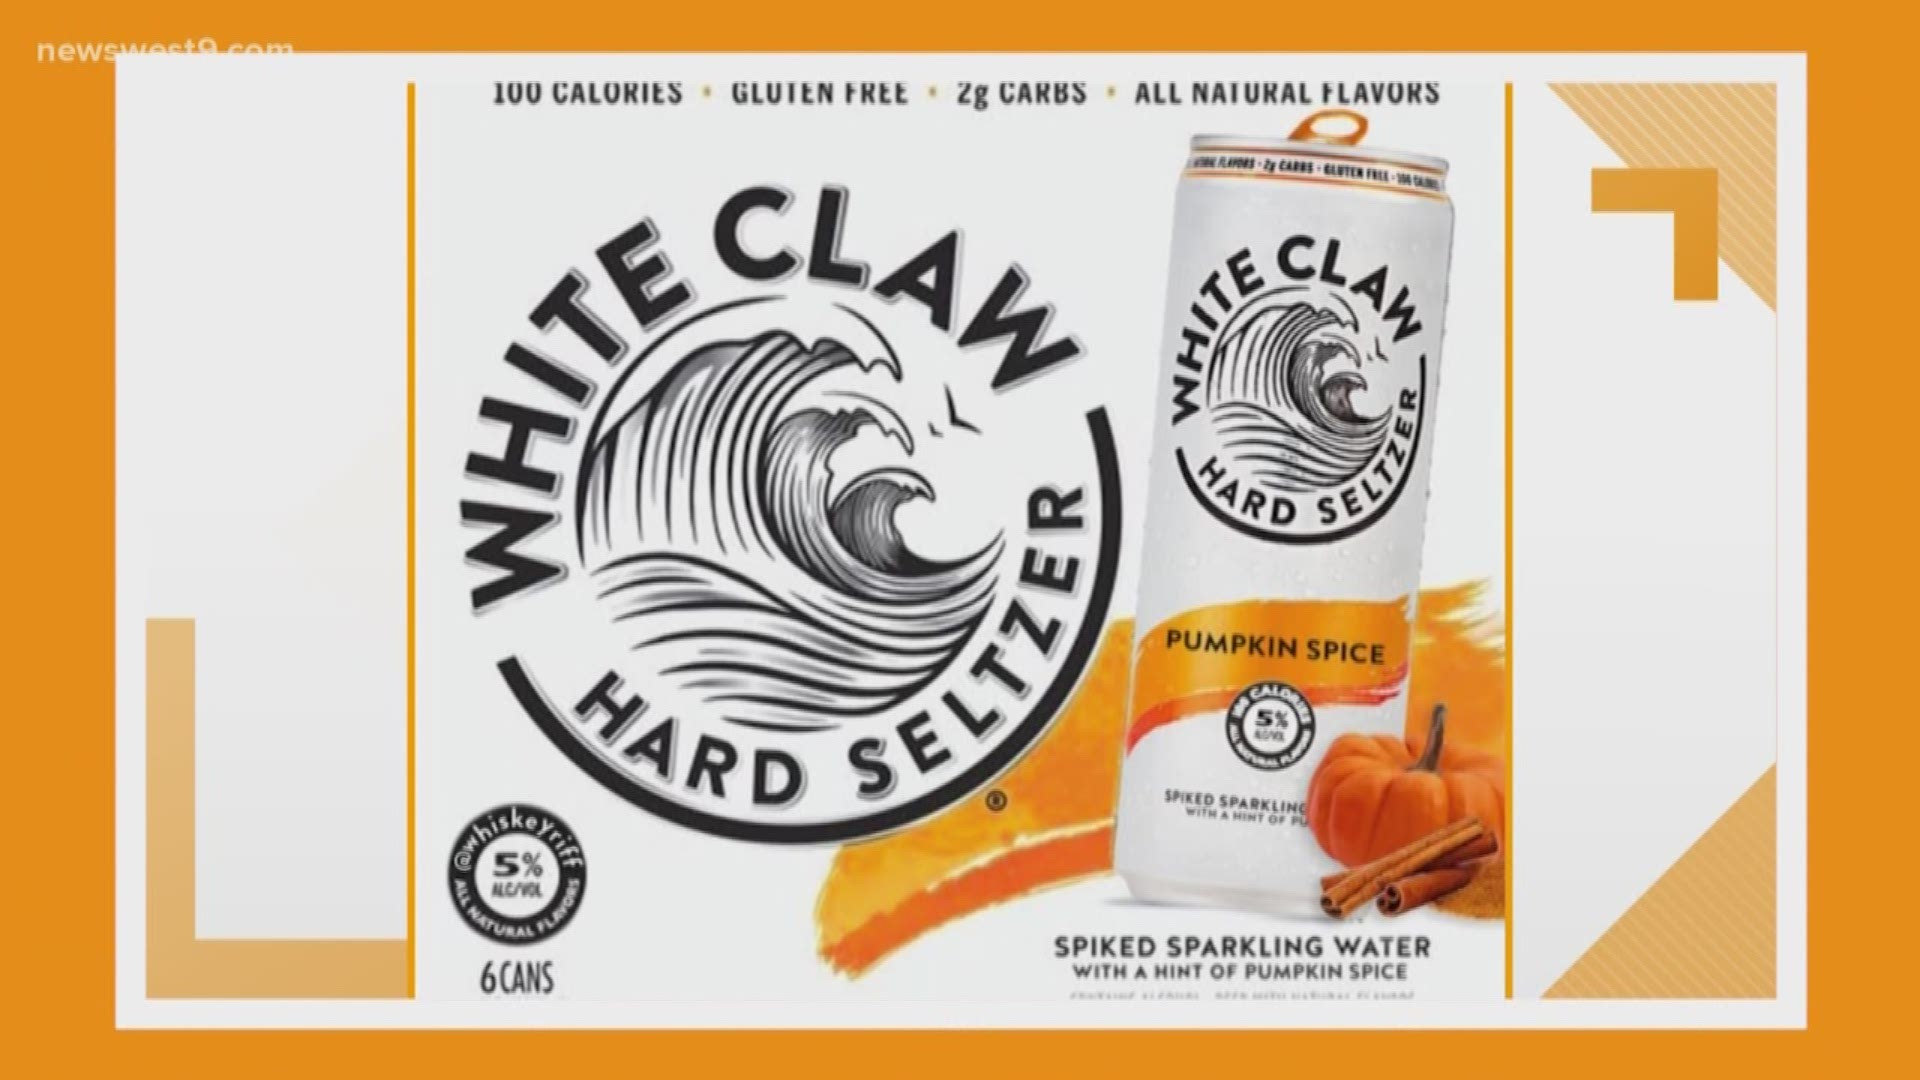 MPD Officer gets a special surprise at the hospital, Bill Hader talks mental illness, and a rumored White Claw flavor has the internet talking.